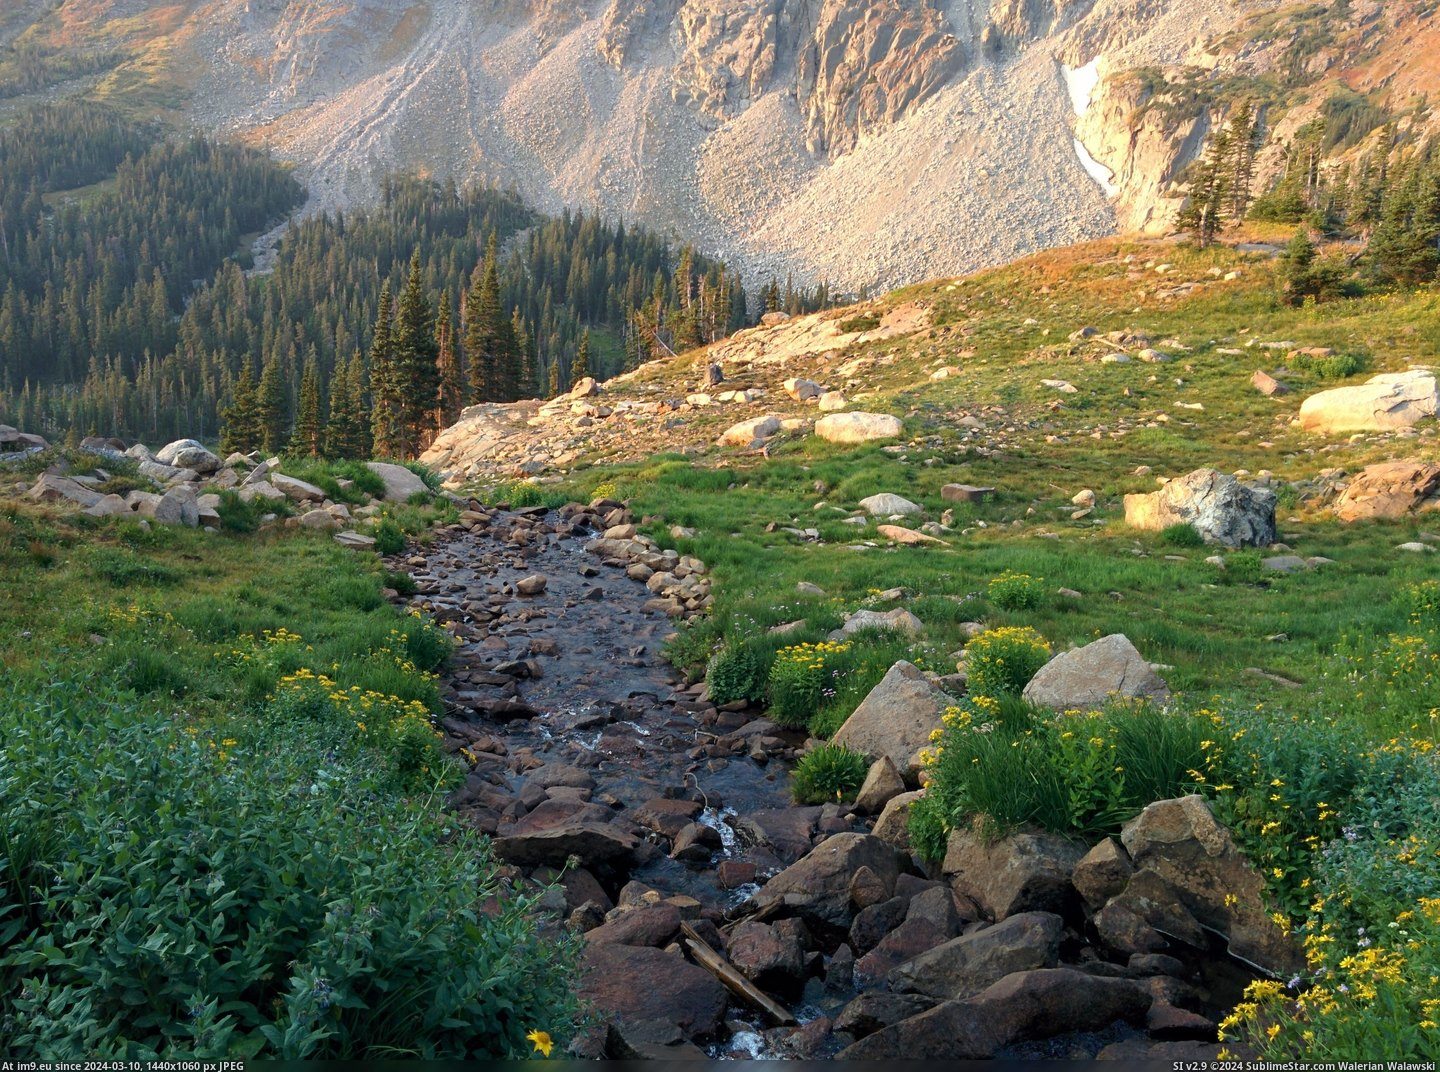 #Indian #Colorado #Peaks #3200x2368 #Hiking #Wilderness [Earthporn] Hiking in the Indian Peaks Wilderness of Colorado this past July. [3200x2368] Pic. (Изображение из альбом My r/EARTHPORN favs))